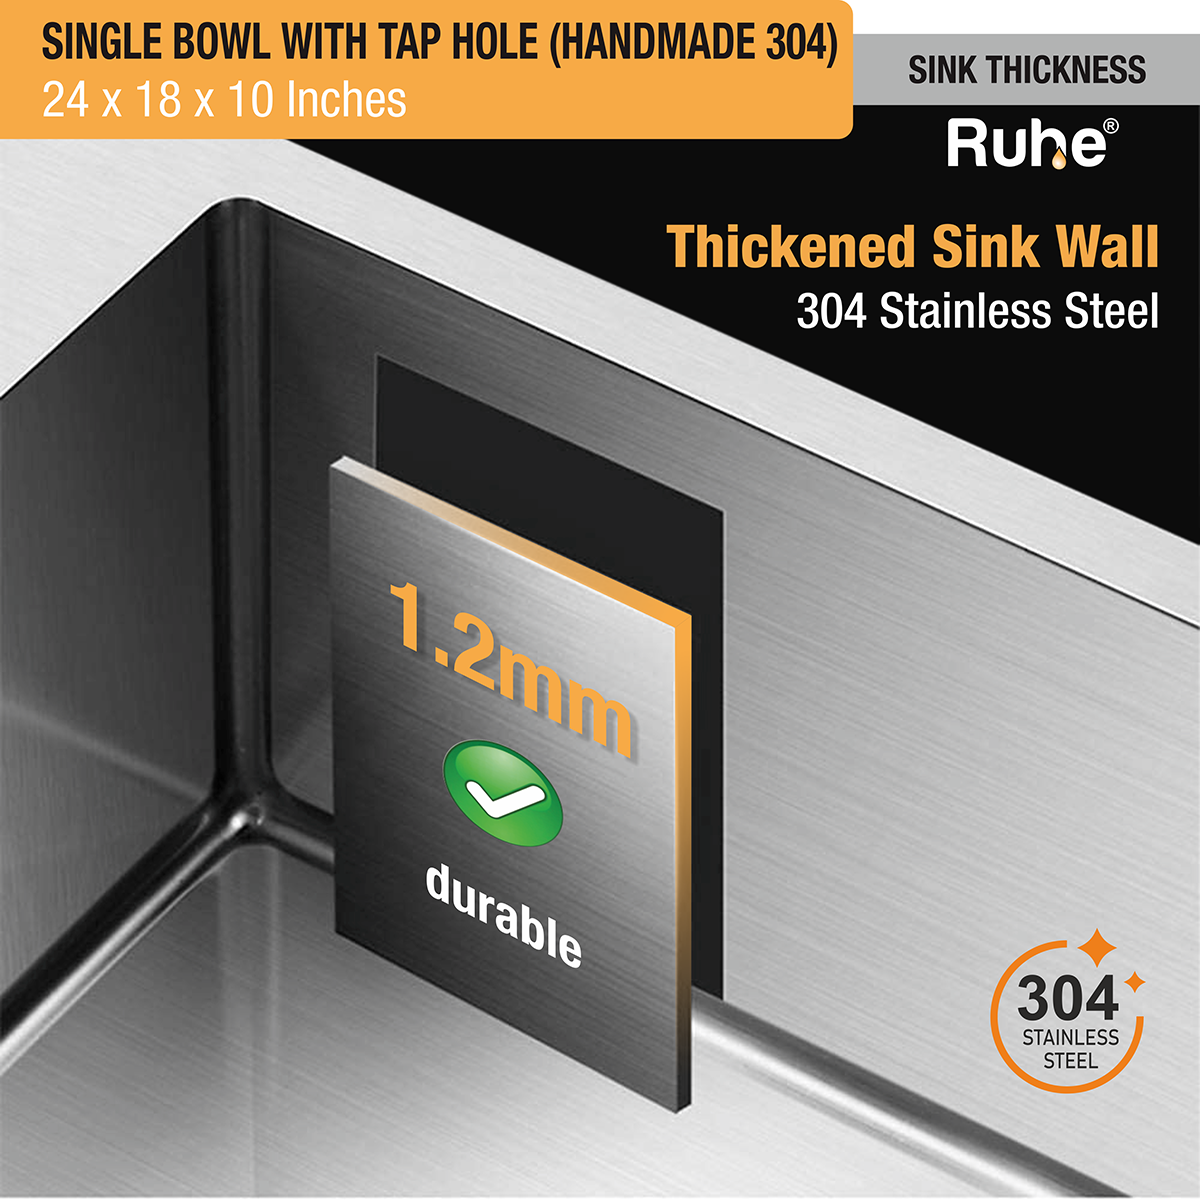 Handmade Single Bowl 304-Grade Kitchen Sink (24 x 18 x 10 Inches) with Tap Hole stainless steel thickness